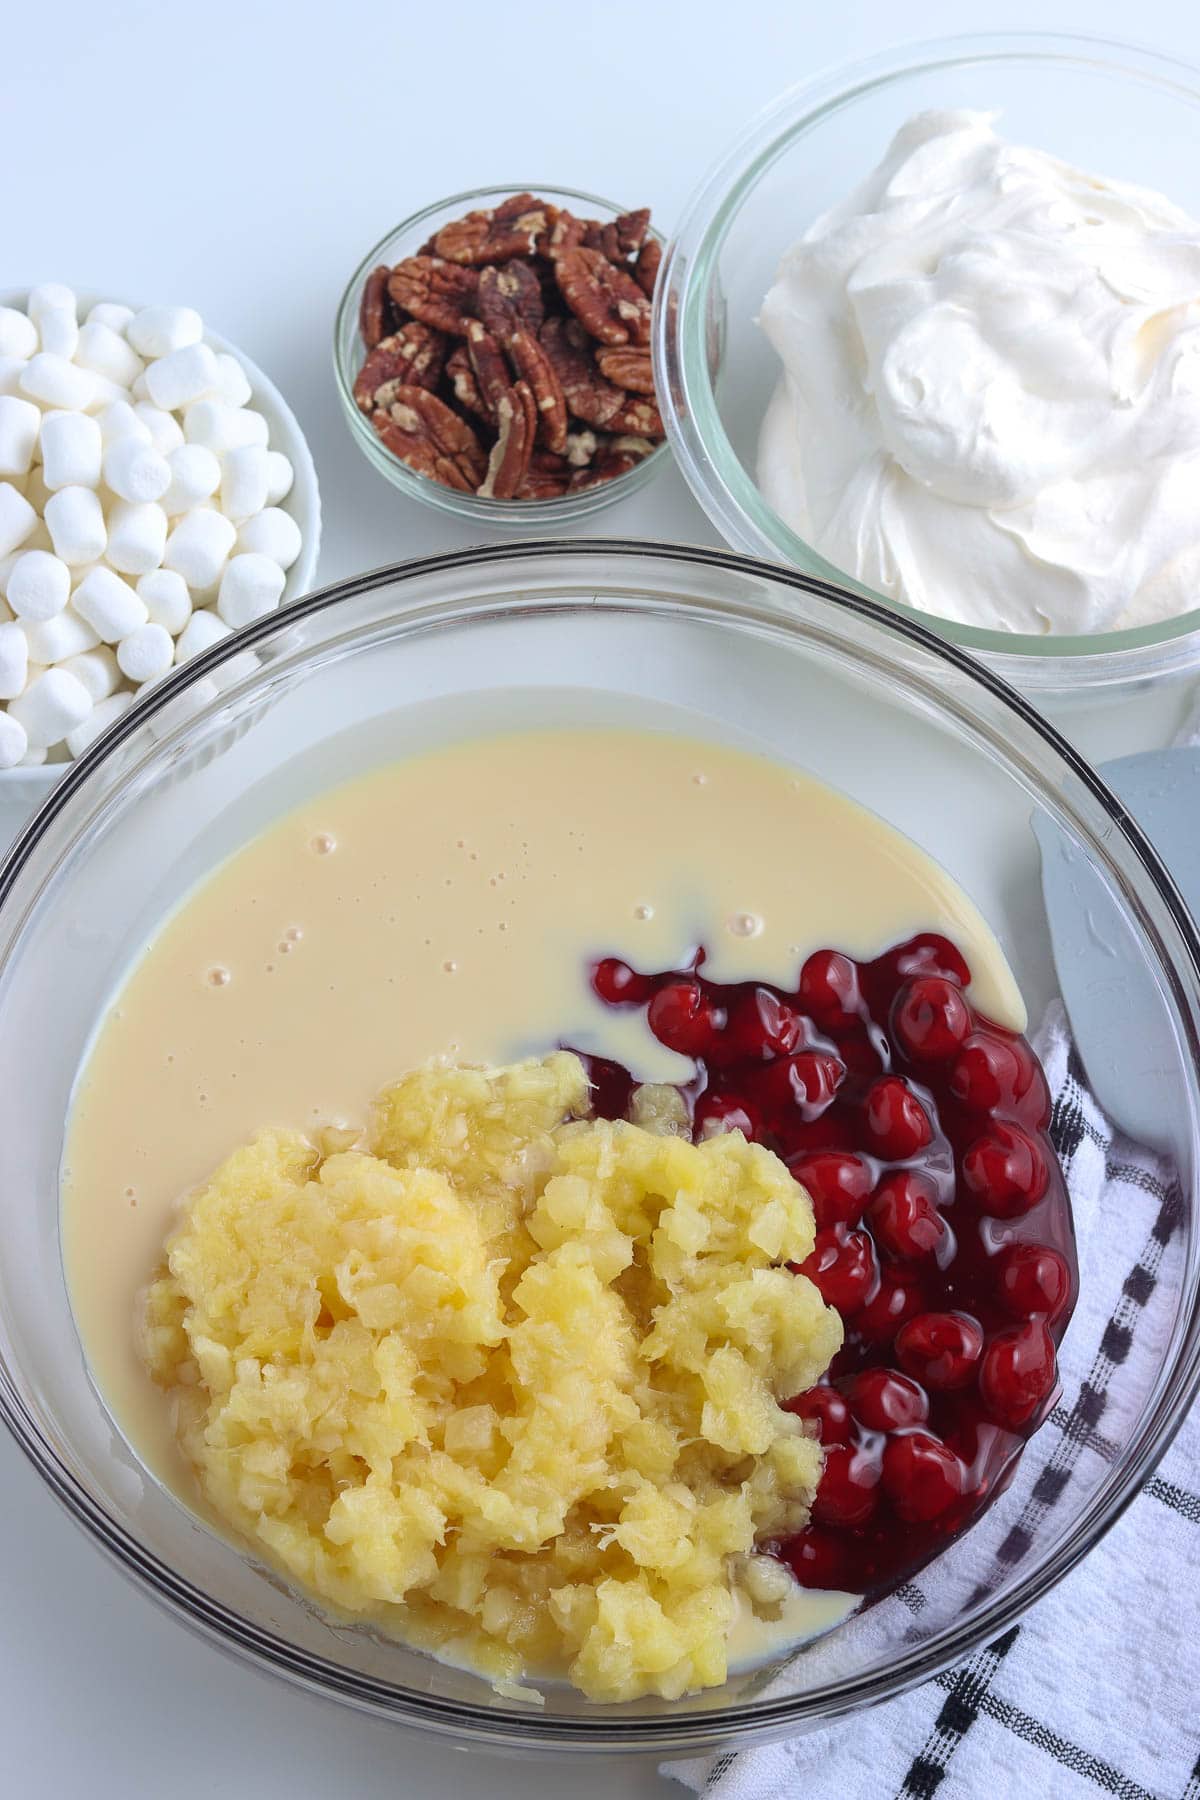 mixing the condensed milk, pineapple and cherries